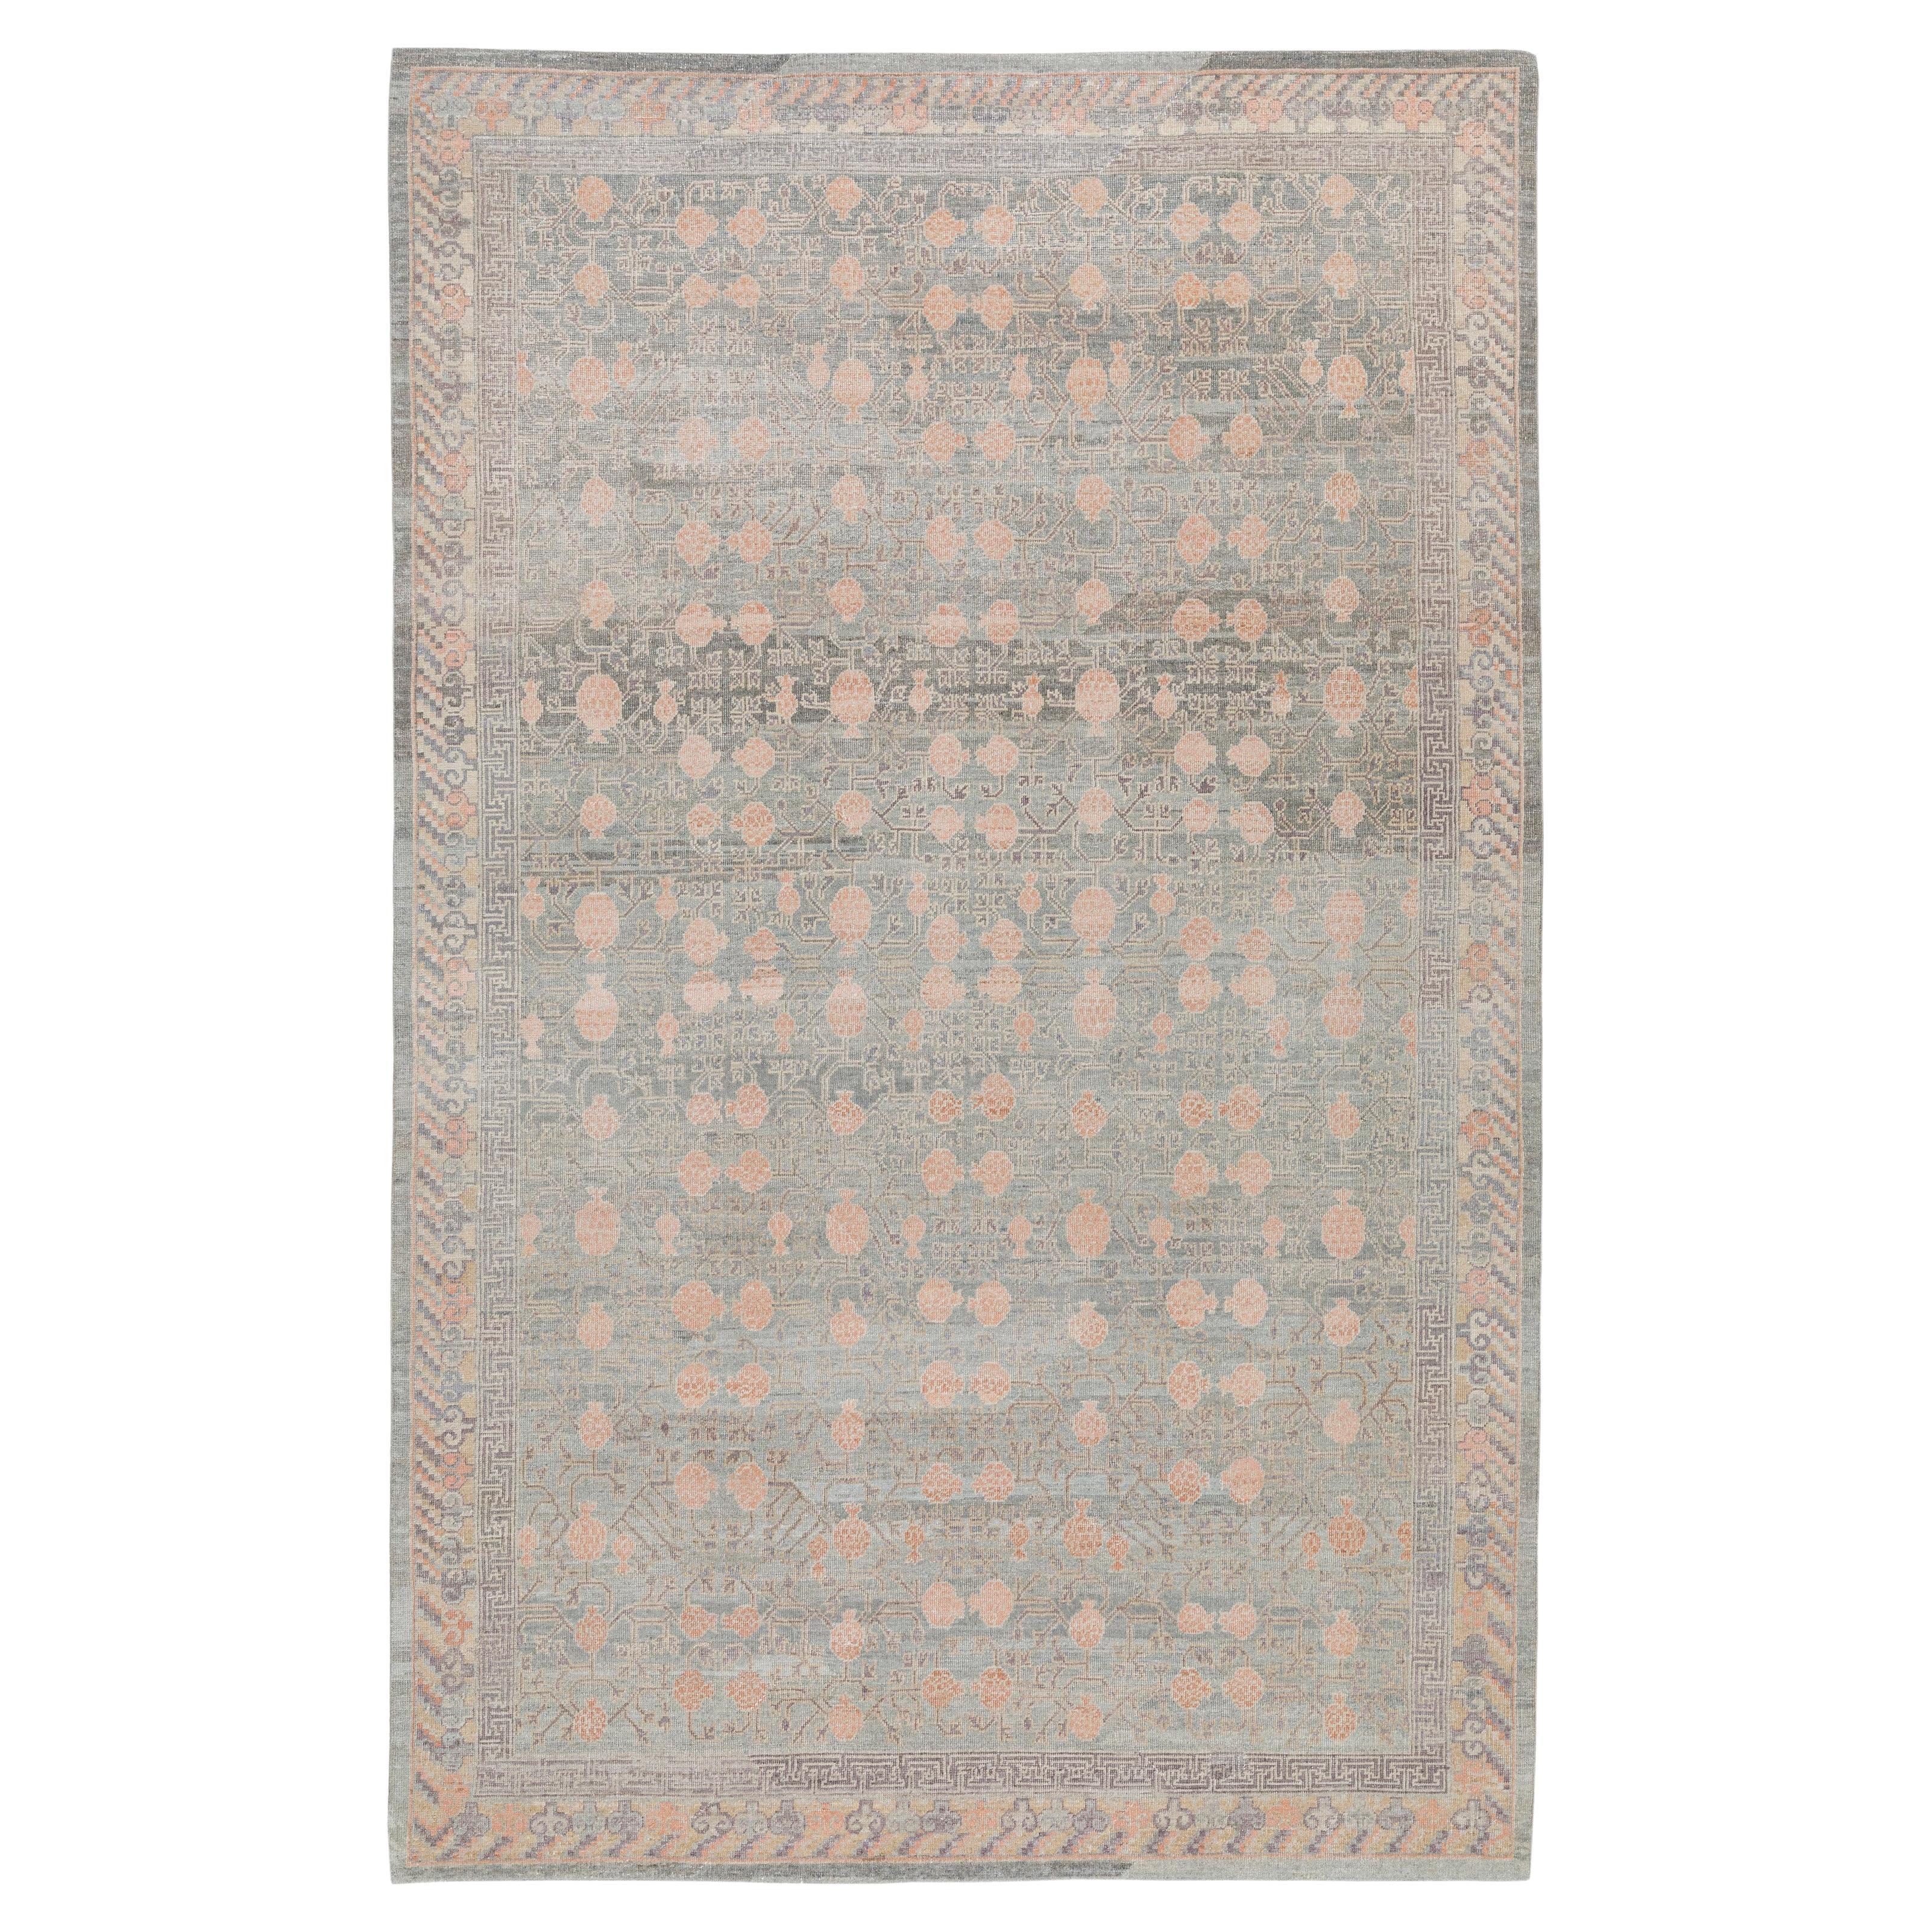 Decorative Handknotted Khotan Samarghand Style Rug with a Pomegranate Design 